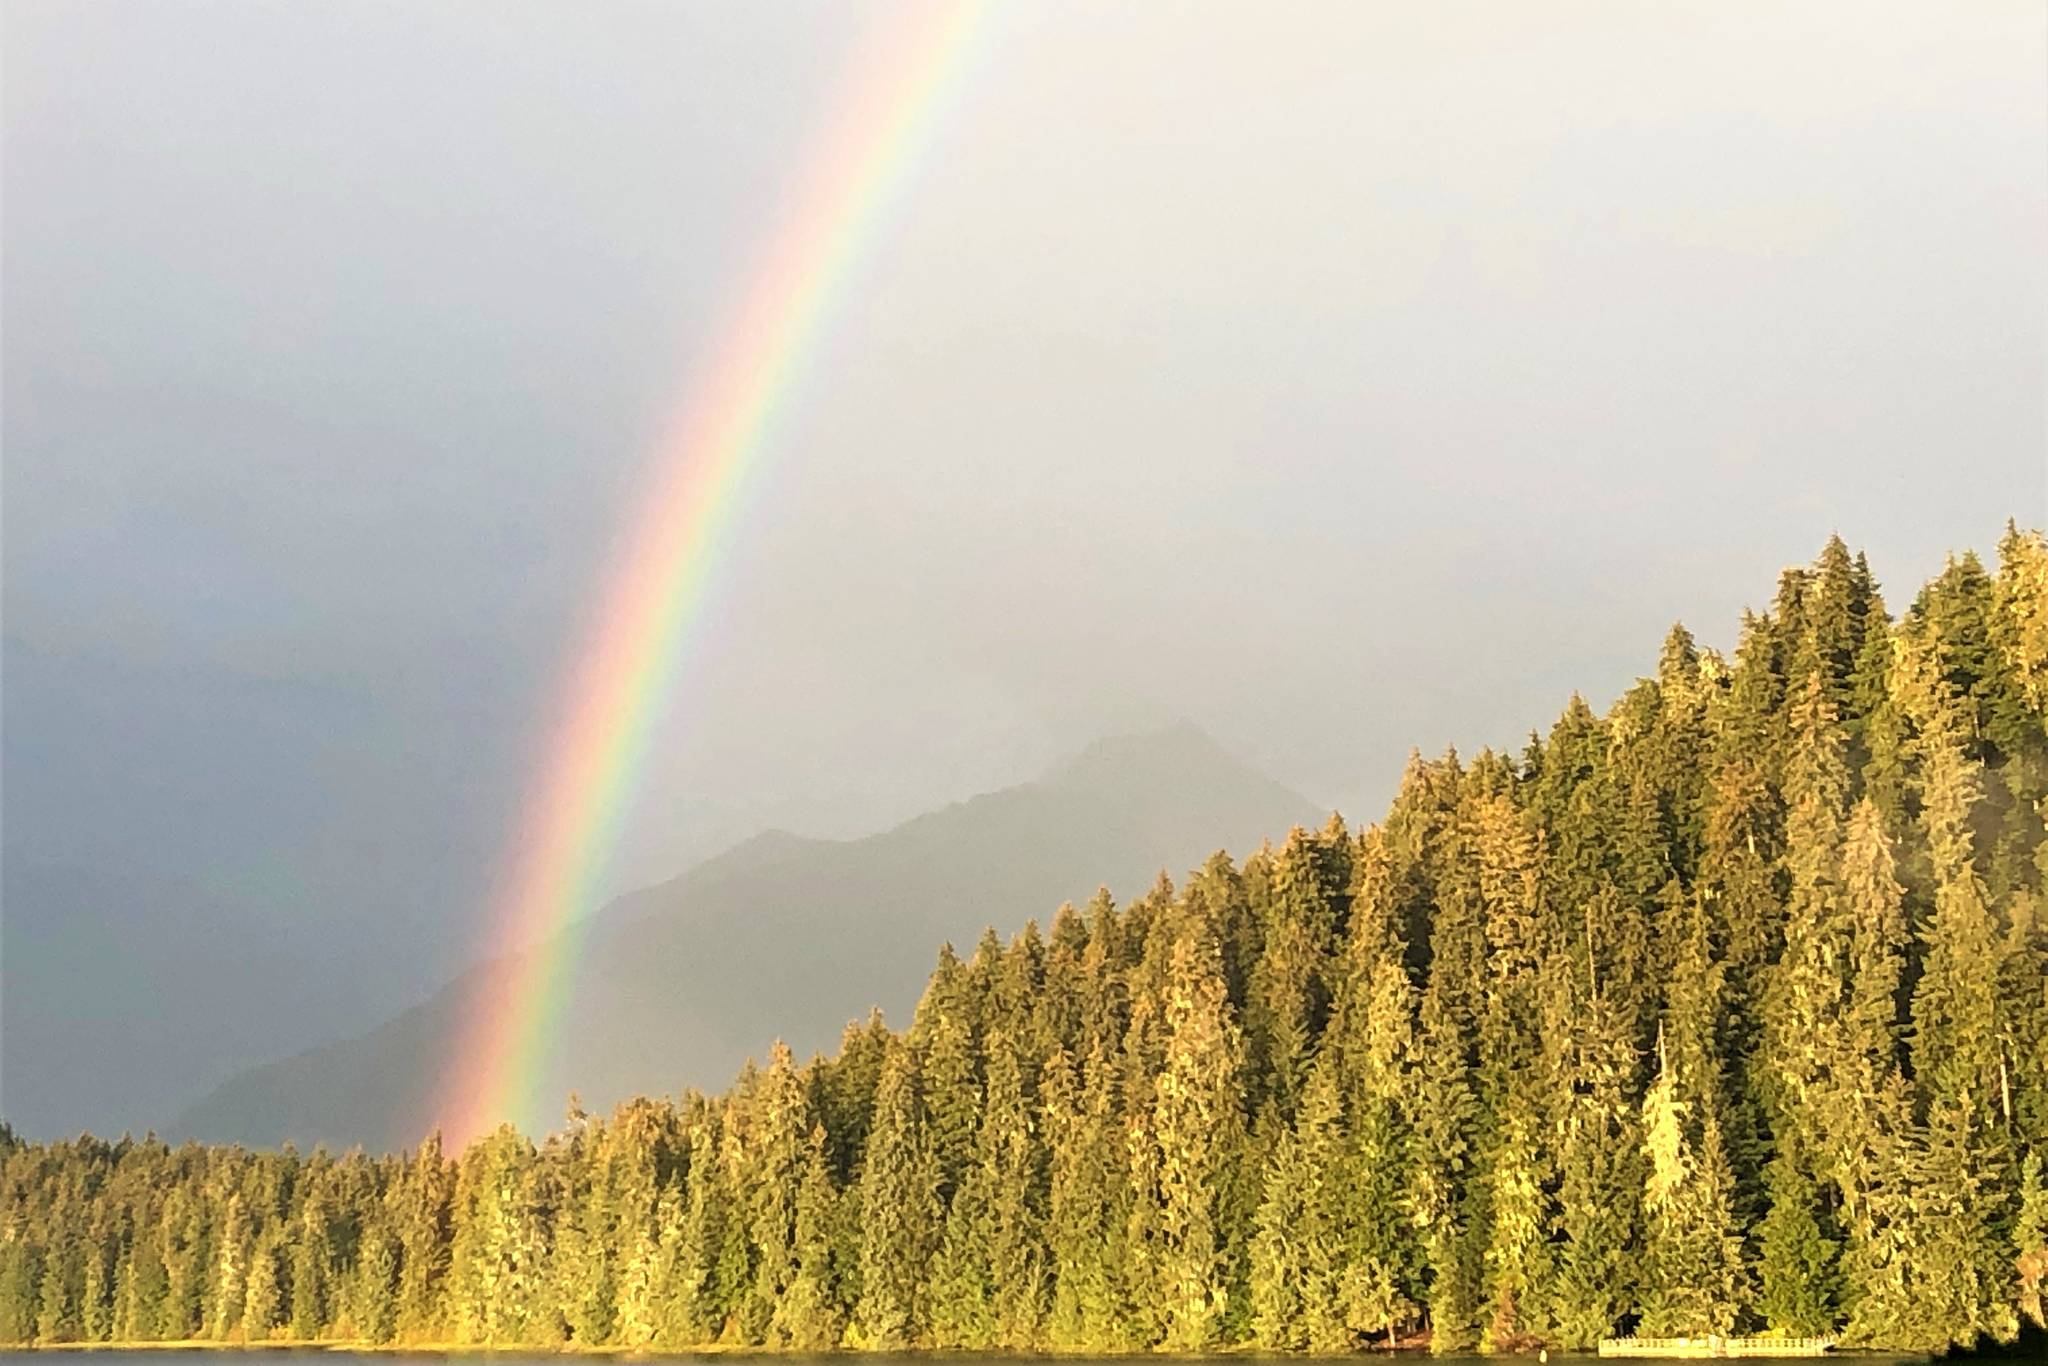 A rainbow over Auke Lake, just ahead of Katherine Hayhoe’s talk, “Christianity and Climate Change,” at Chapel by the Lake on Sept. 13, 2019. (Peter Segall | Juneau Empire )